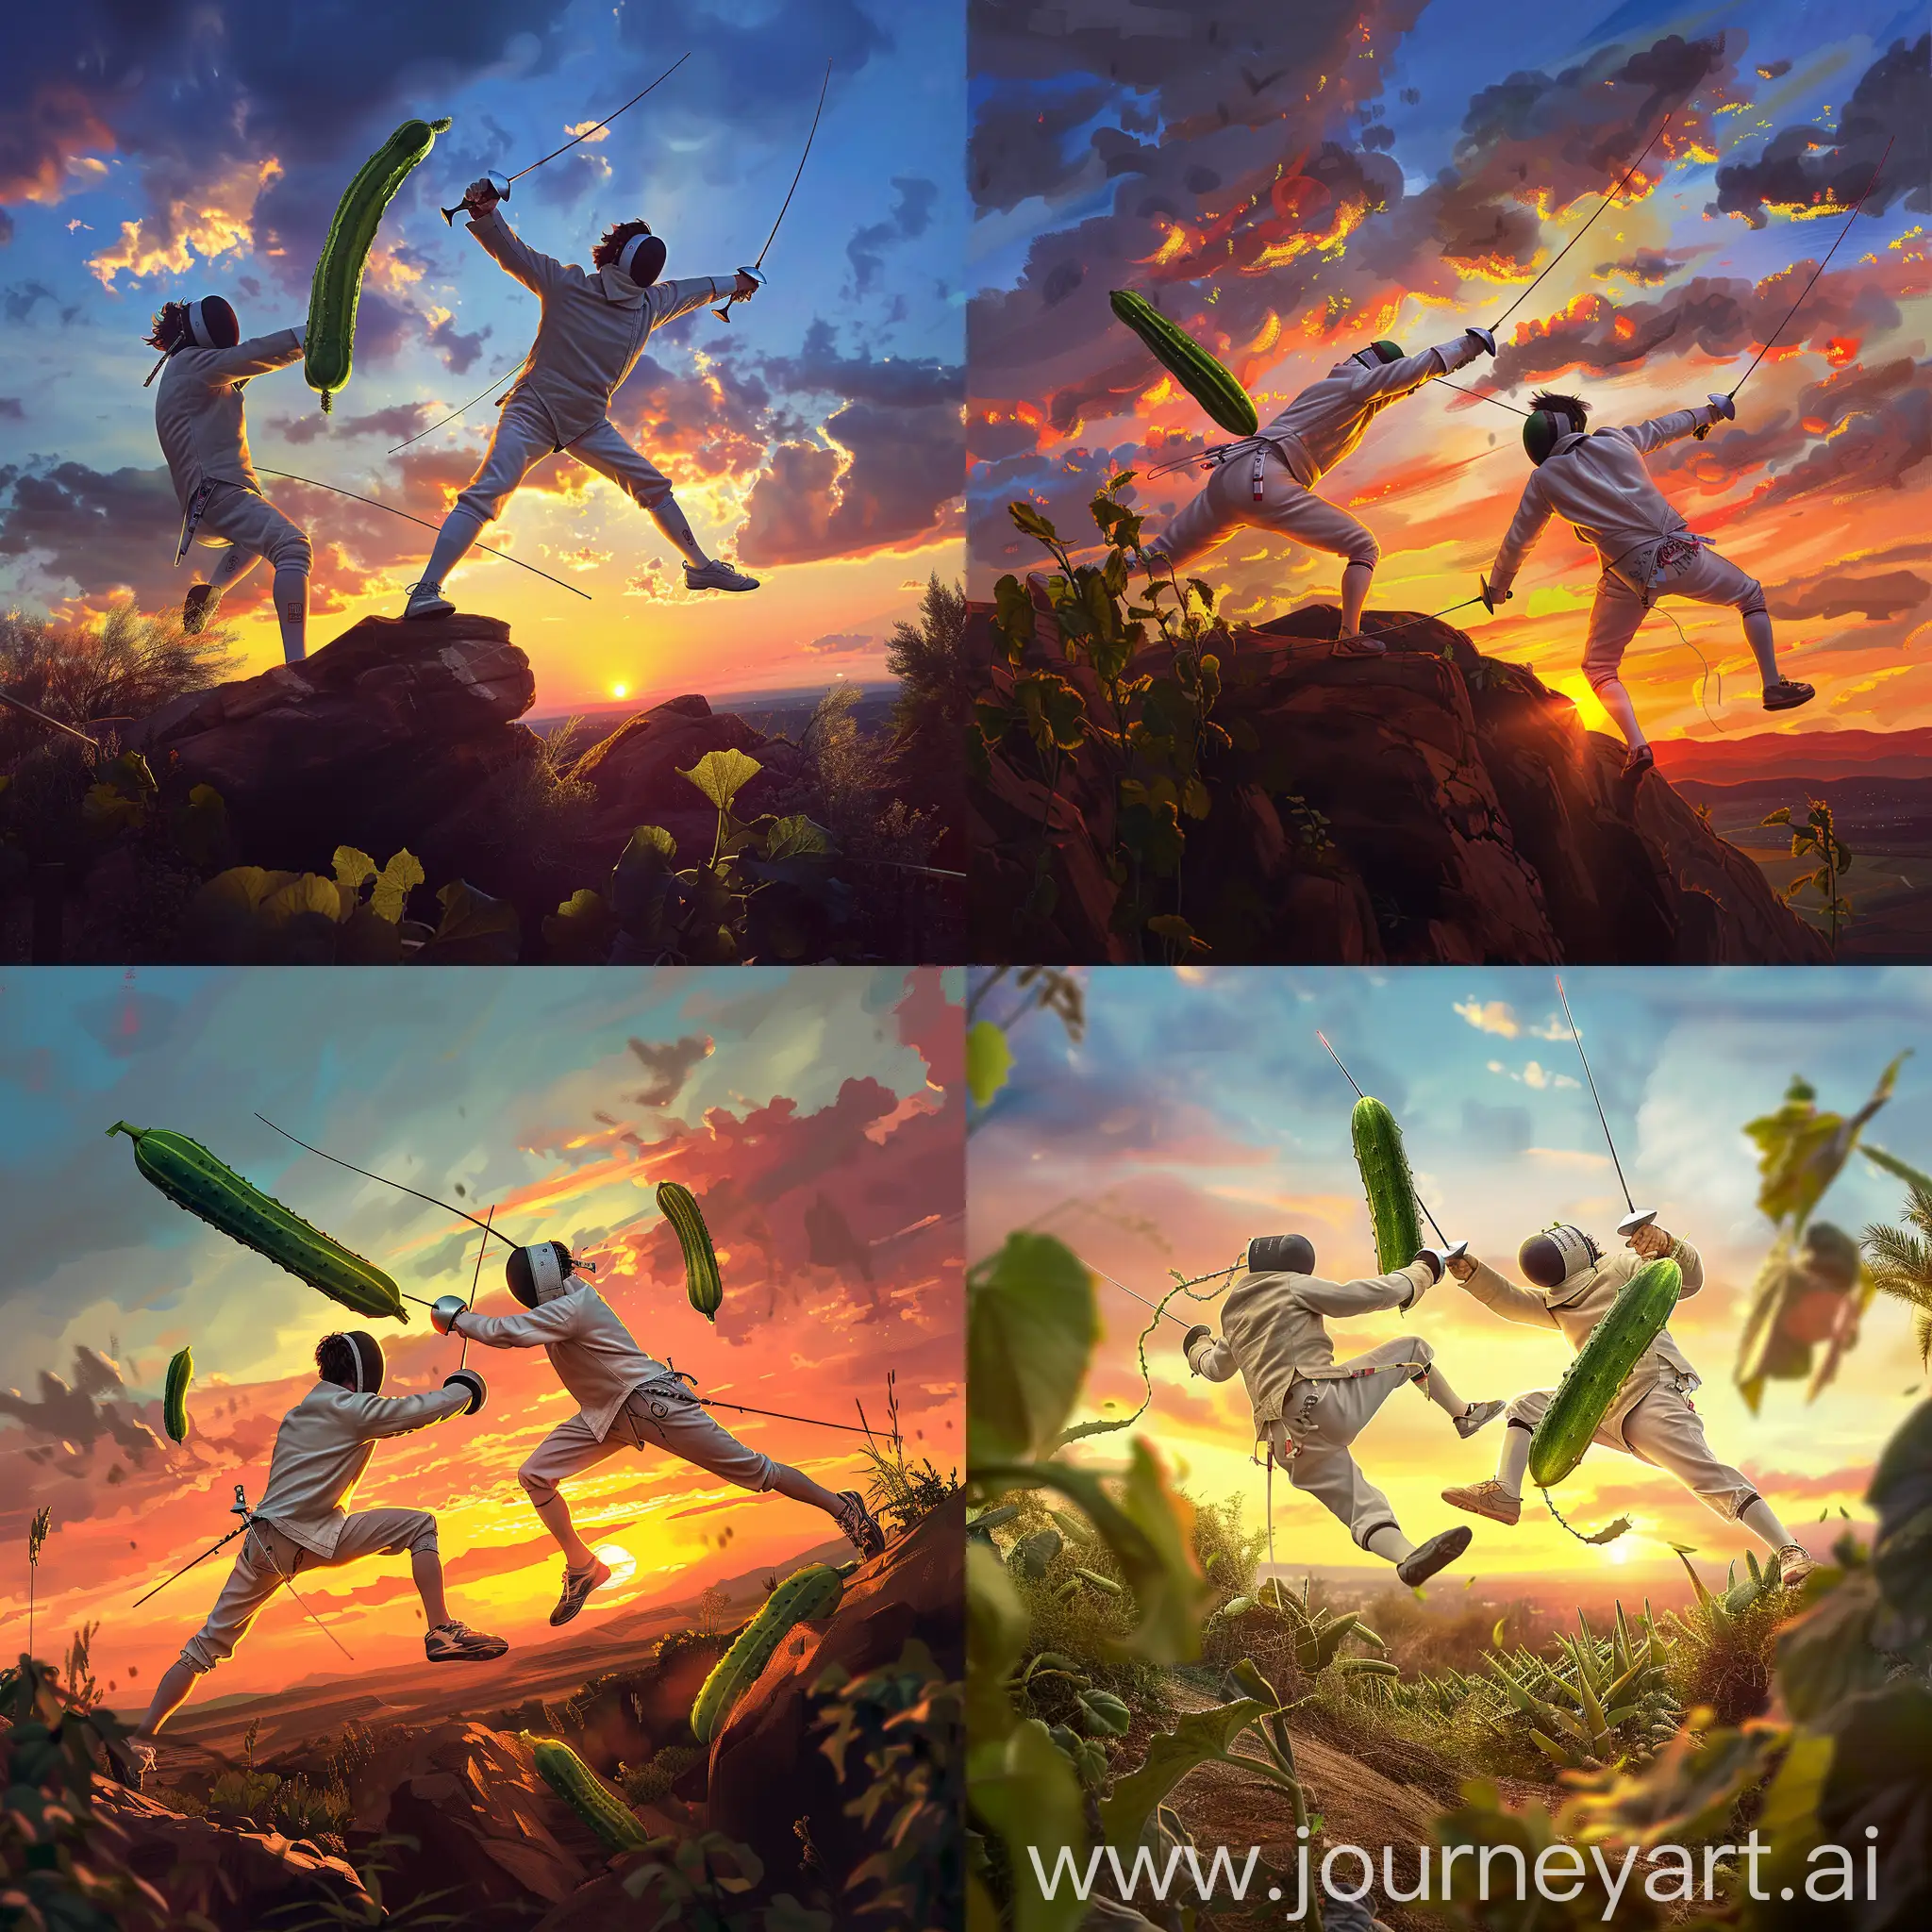 Competitive-Cucumber-Fencing-Duel-at-Sunset